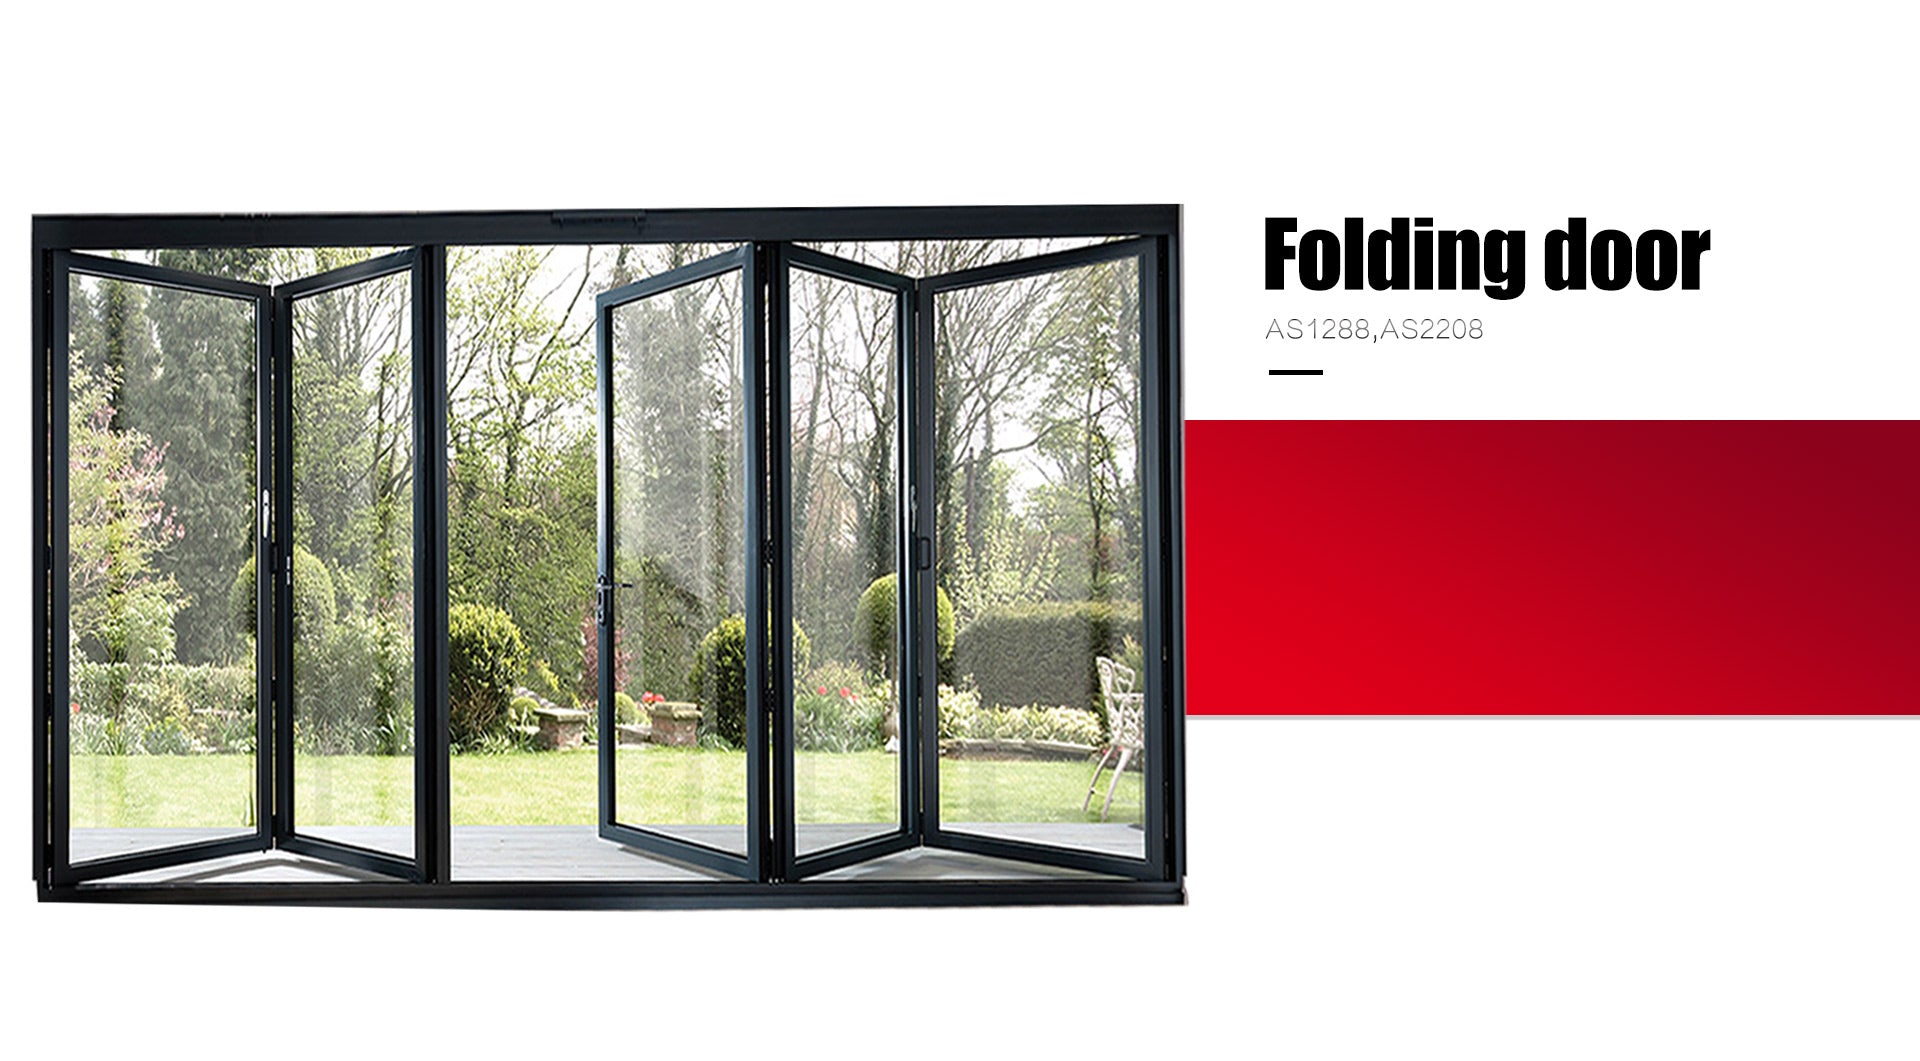 What Reasons to Install Bifold Doors